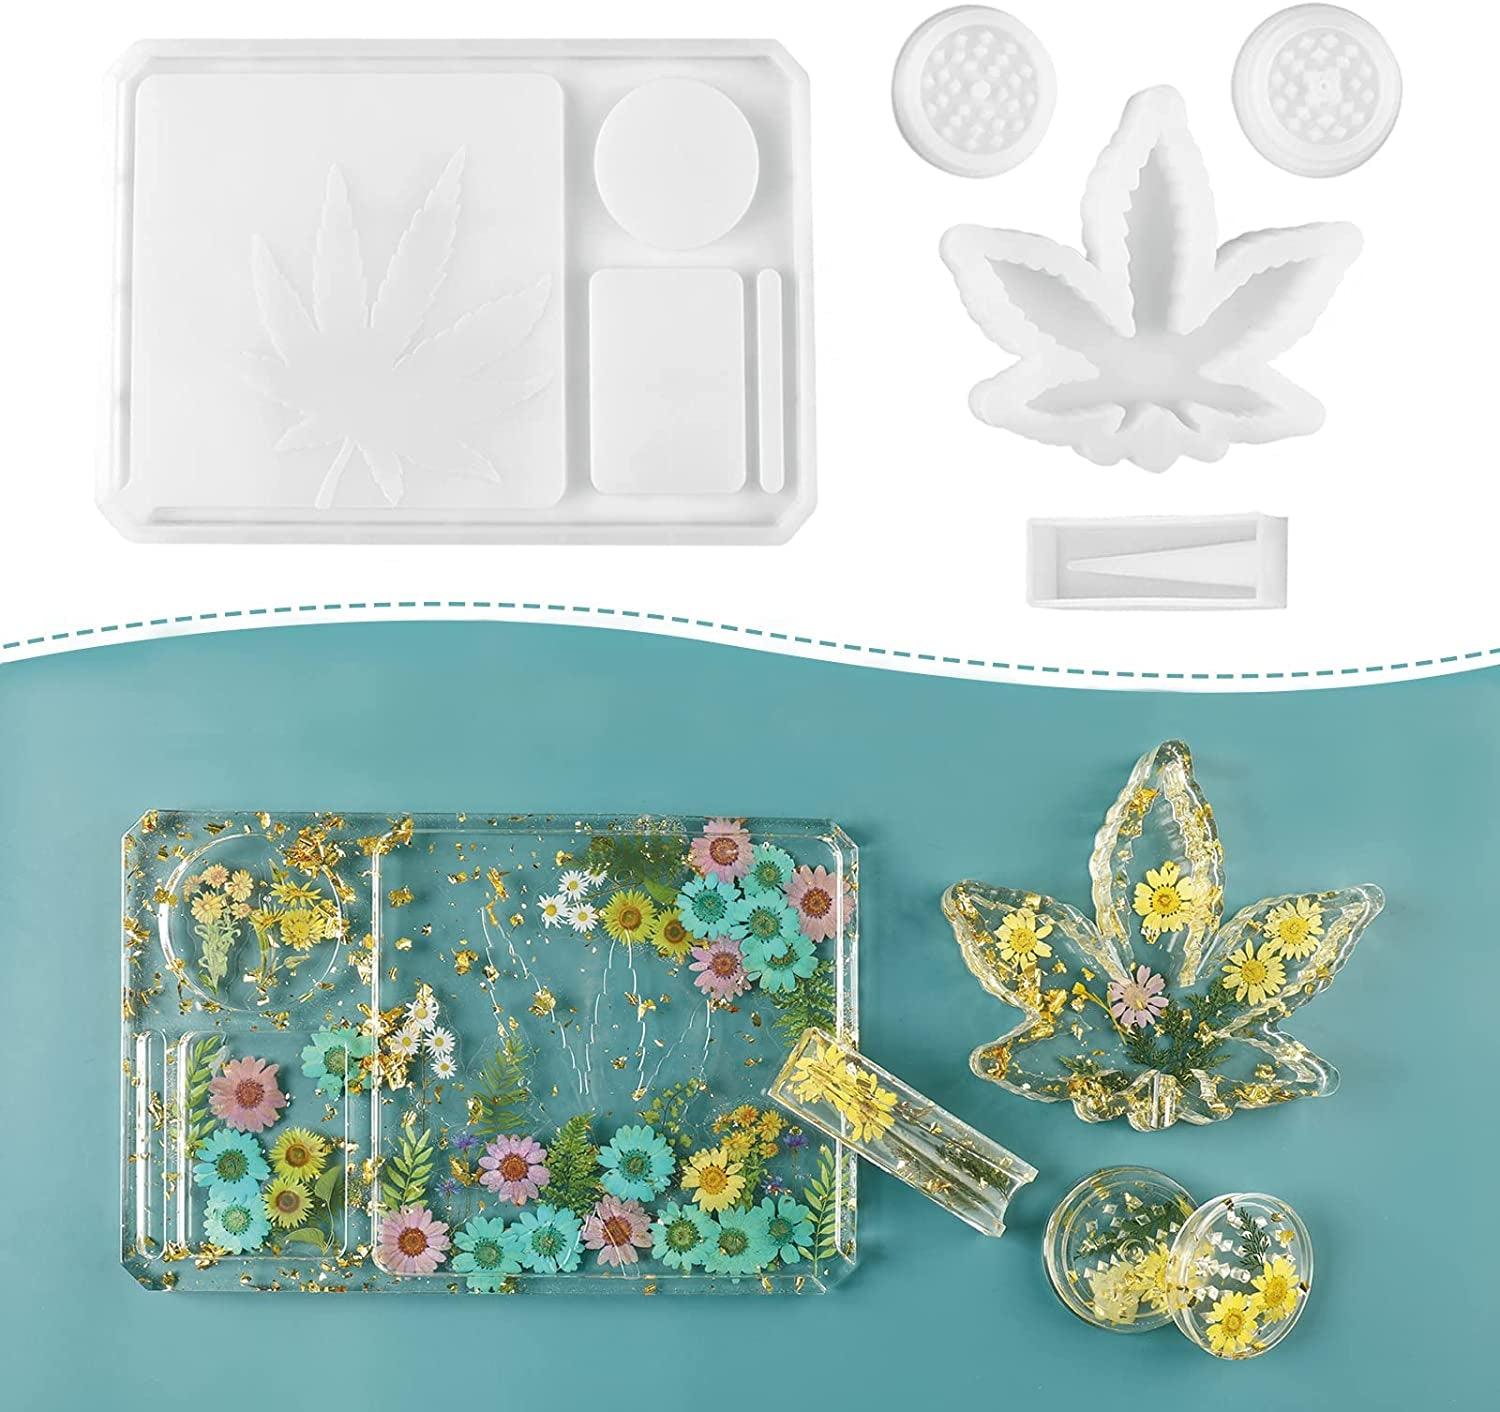 Roll up Tray Mold Resin, Rolling Tray Mold, Candle Holder, Jewelry Storage  Box, Weed Grinder, Home Decoration, Casting Crafts Epoxy Resin 